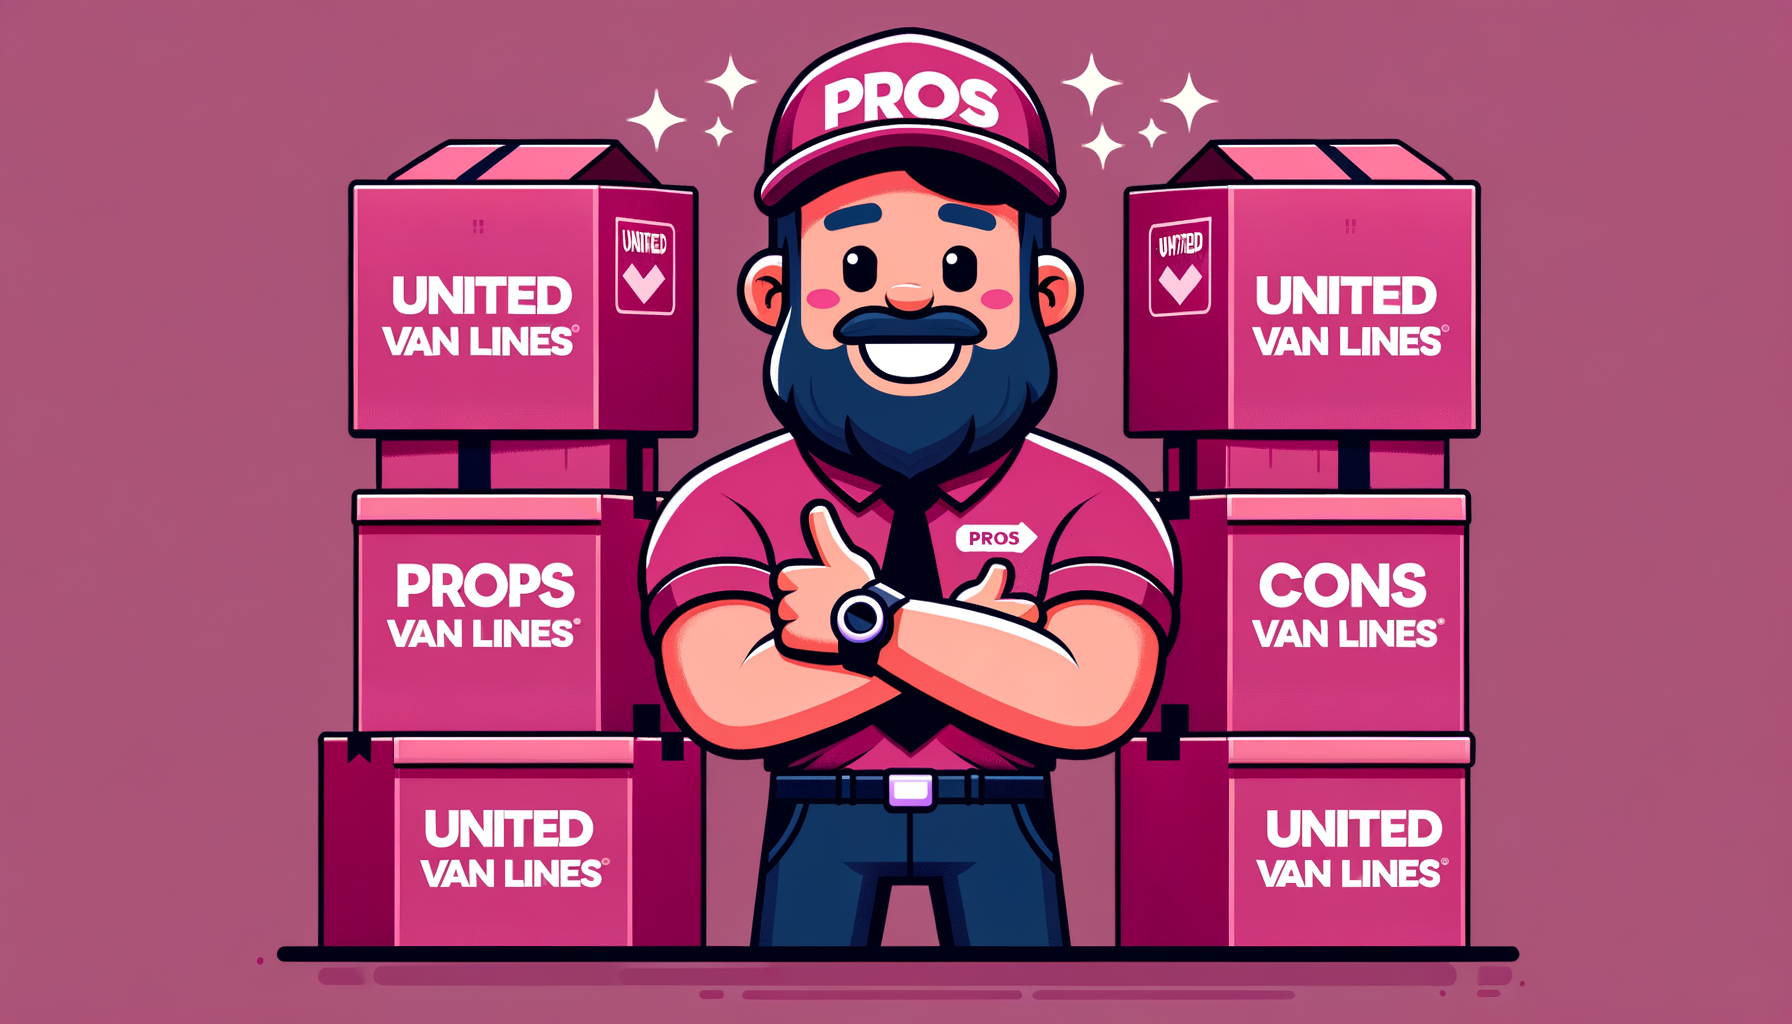 Cartoon-style fuschia image showcasing the benefits of choosing United Van Lines, featuring happy customers and efficient moving services.